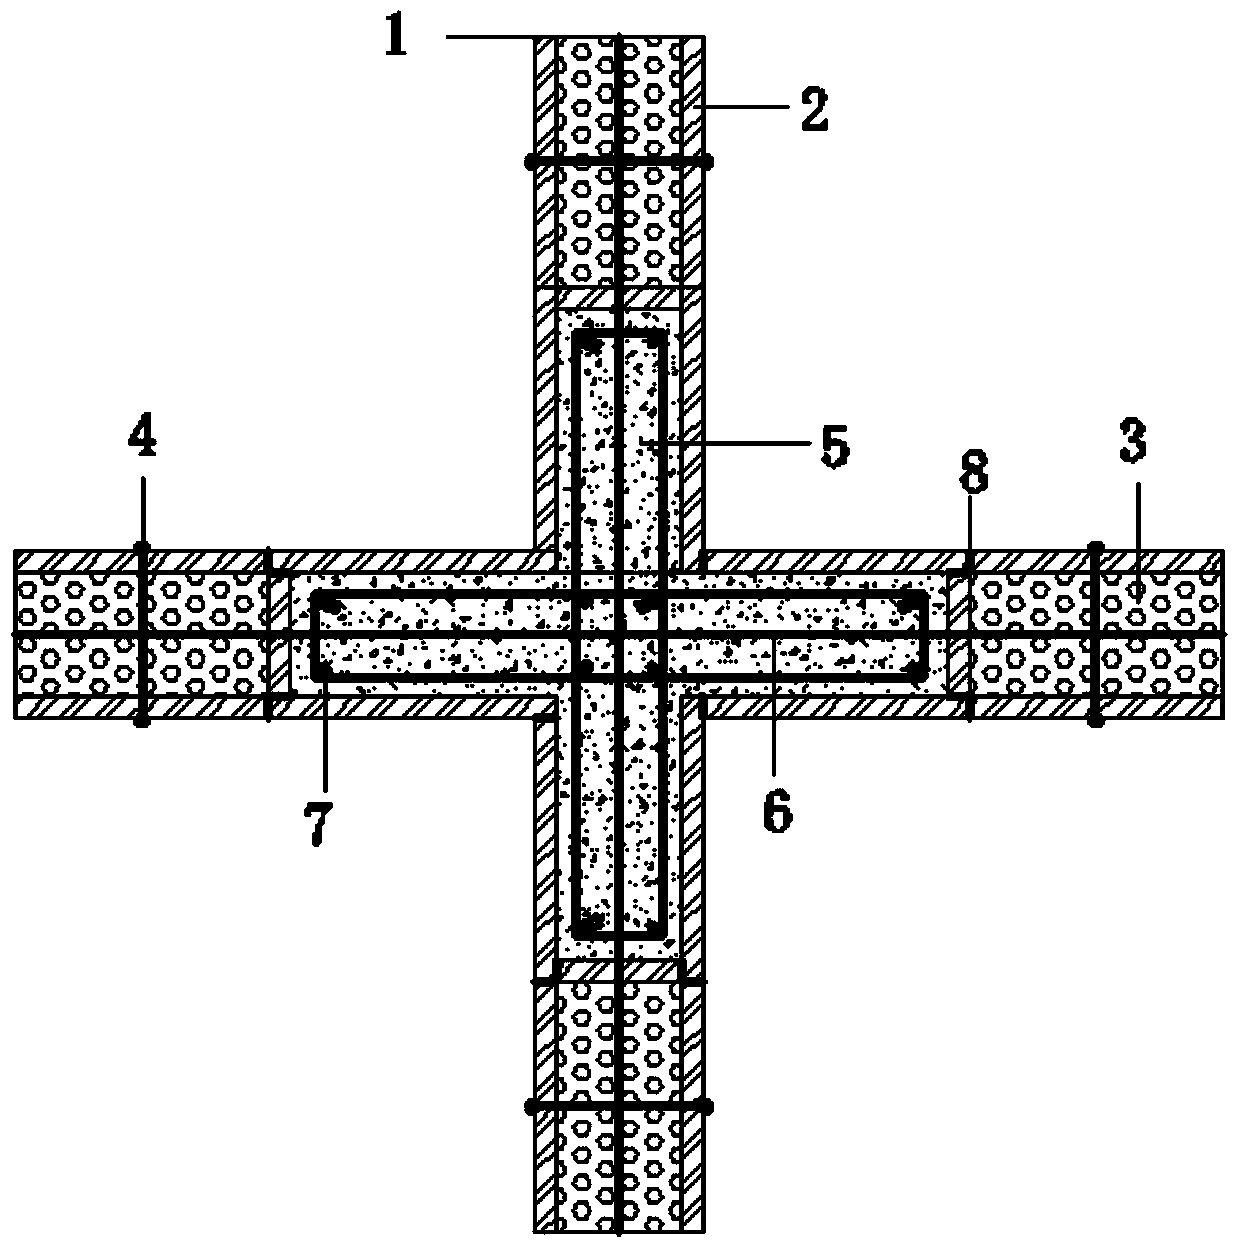 Foamed concrete bearing wall wrapped with wire mesh mortar boards and provided with cross-shaped frame and construction method